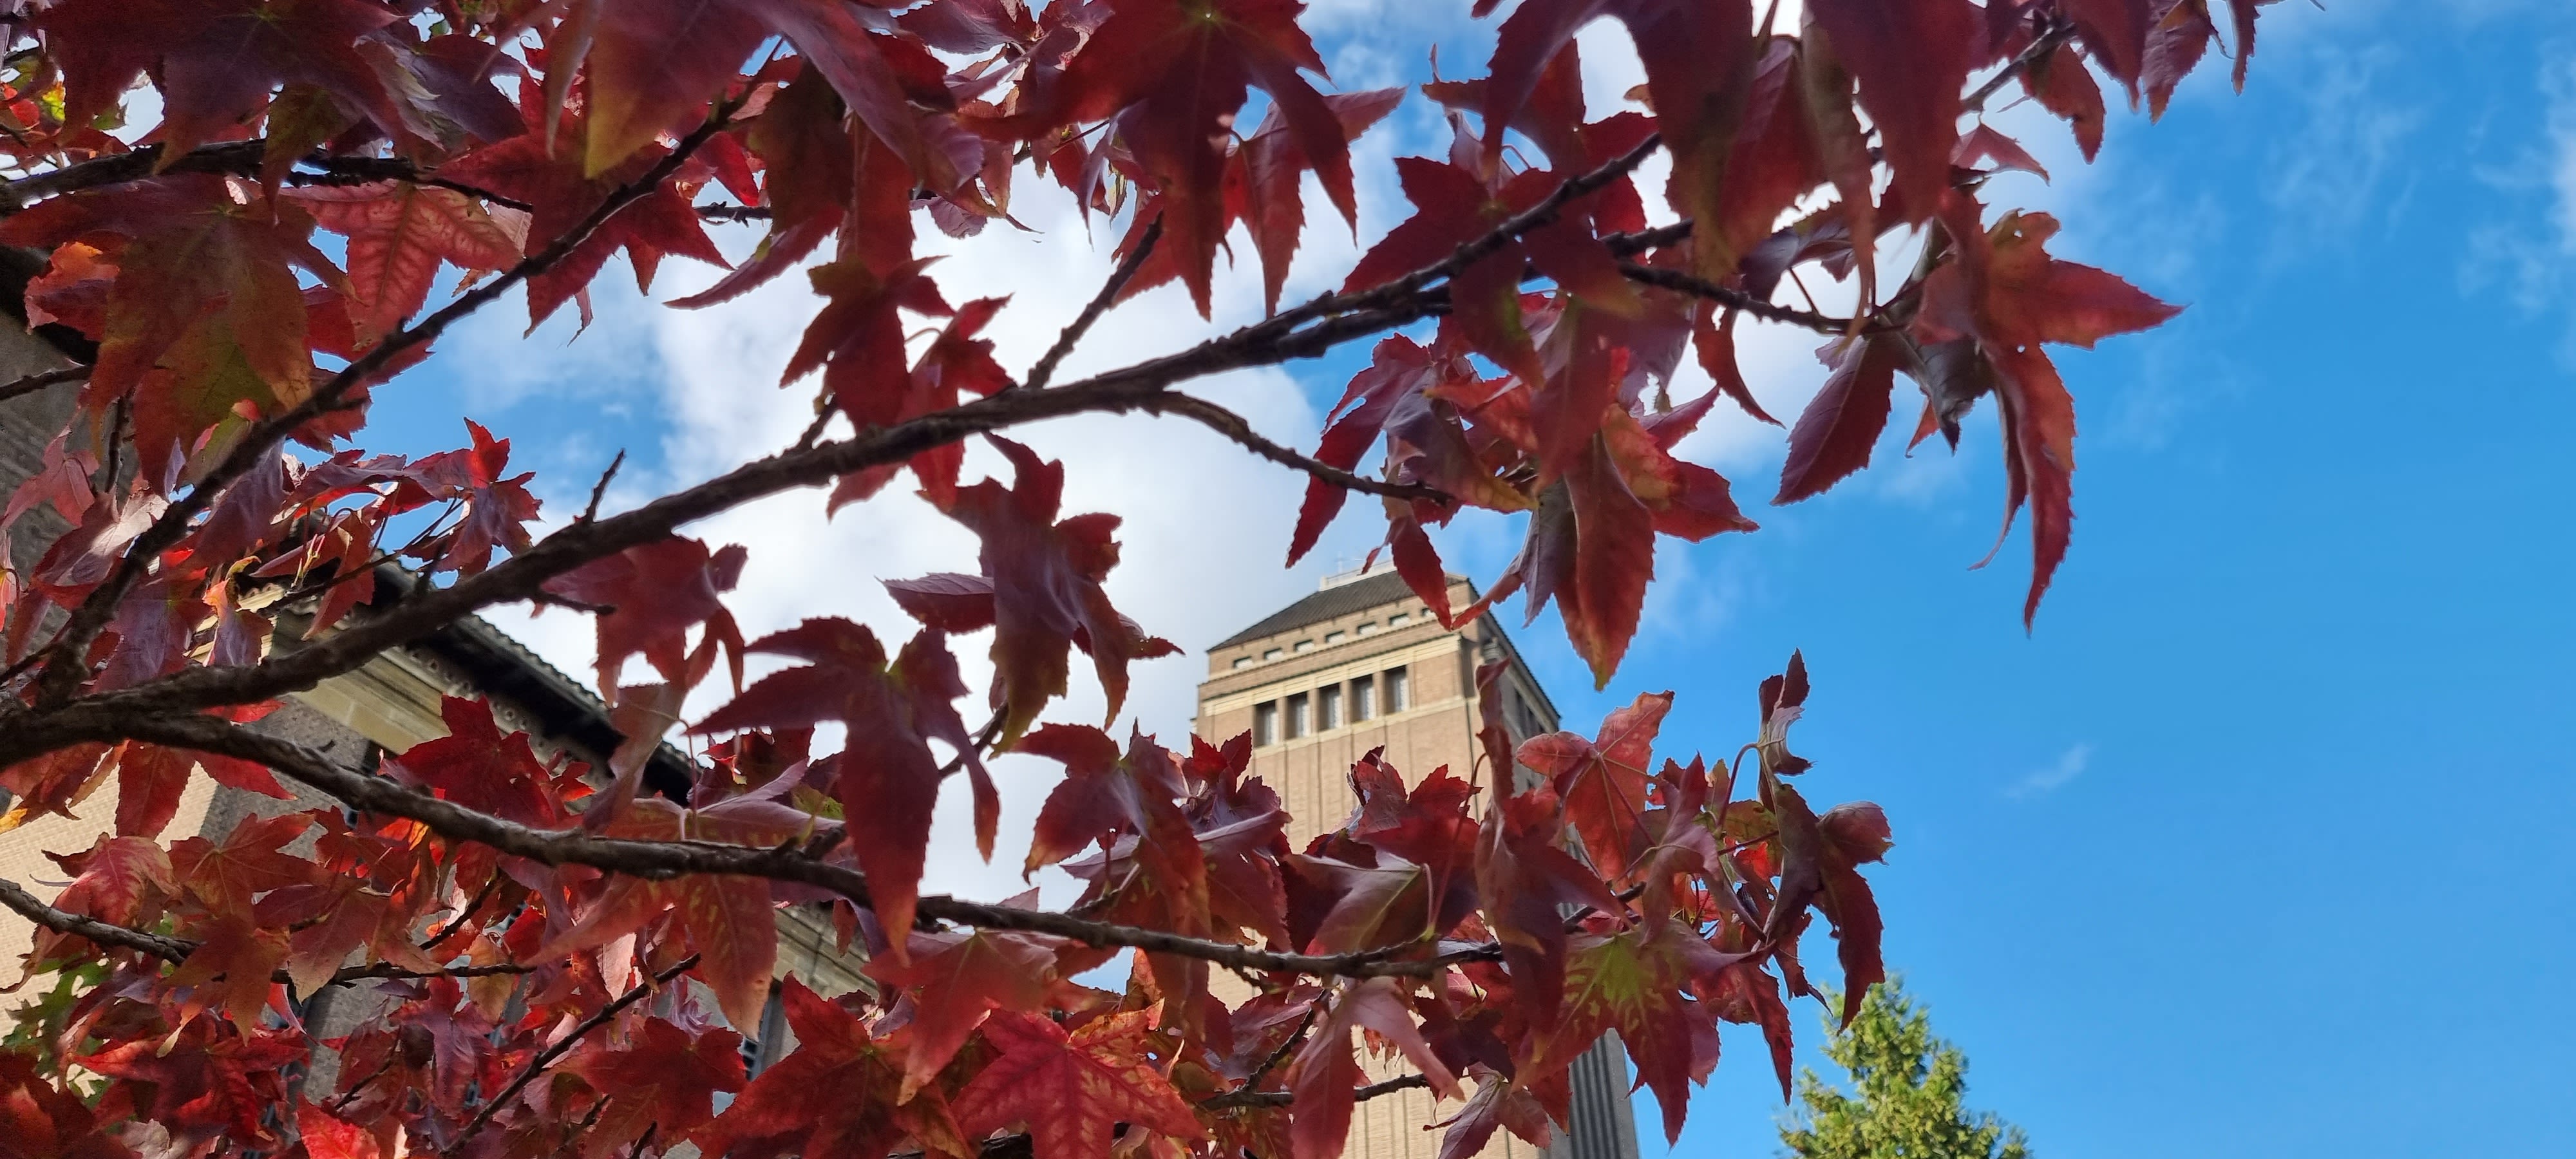 The library tower stands against a blue sky behind red maple leaves 